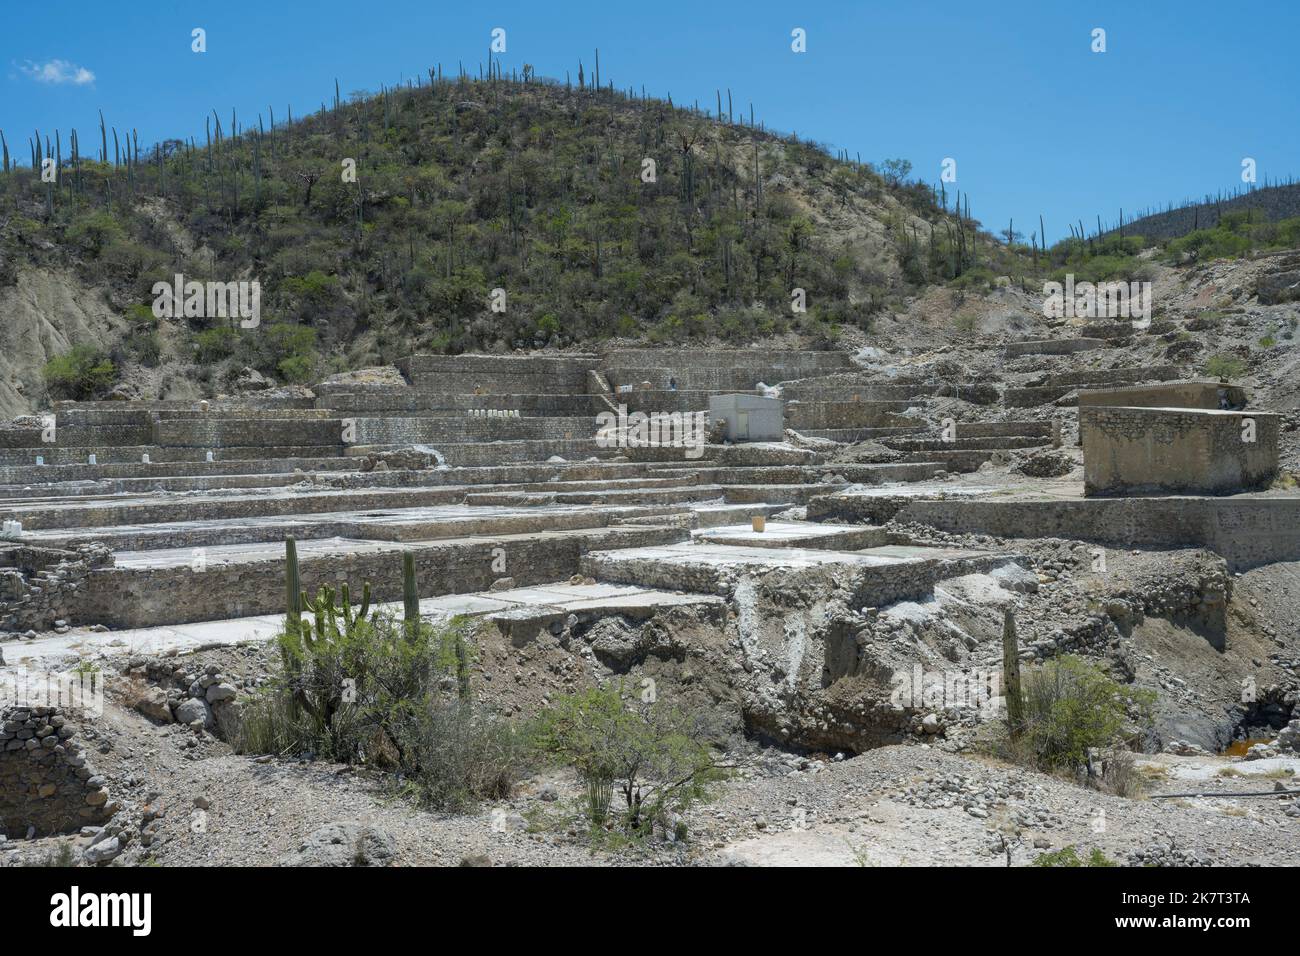 View of the saline pools at a salt mining operation in Zapotitlan de las Salinas, in the state of Puebla, Mexico. Stock Photo